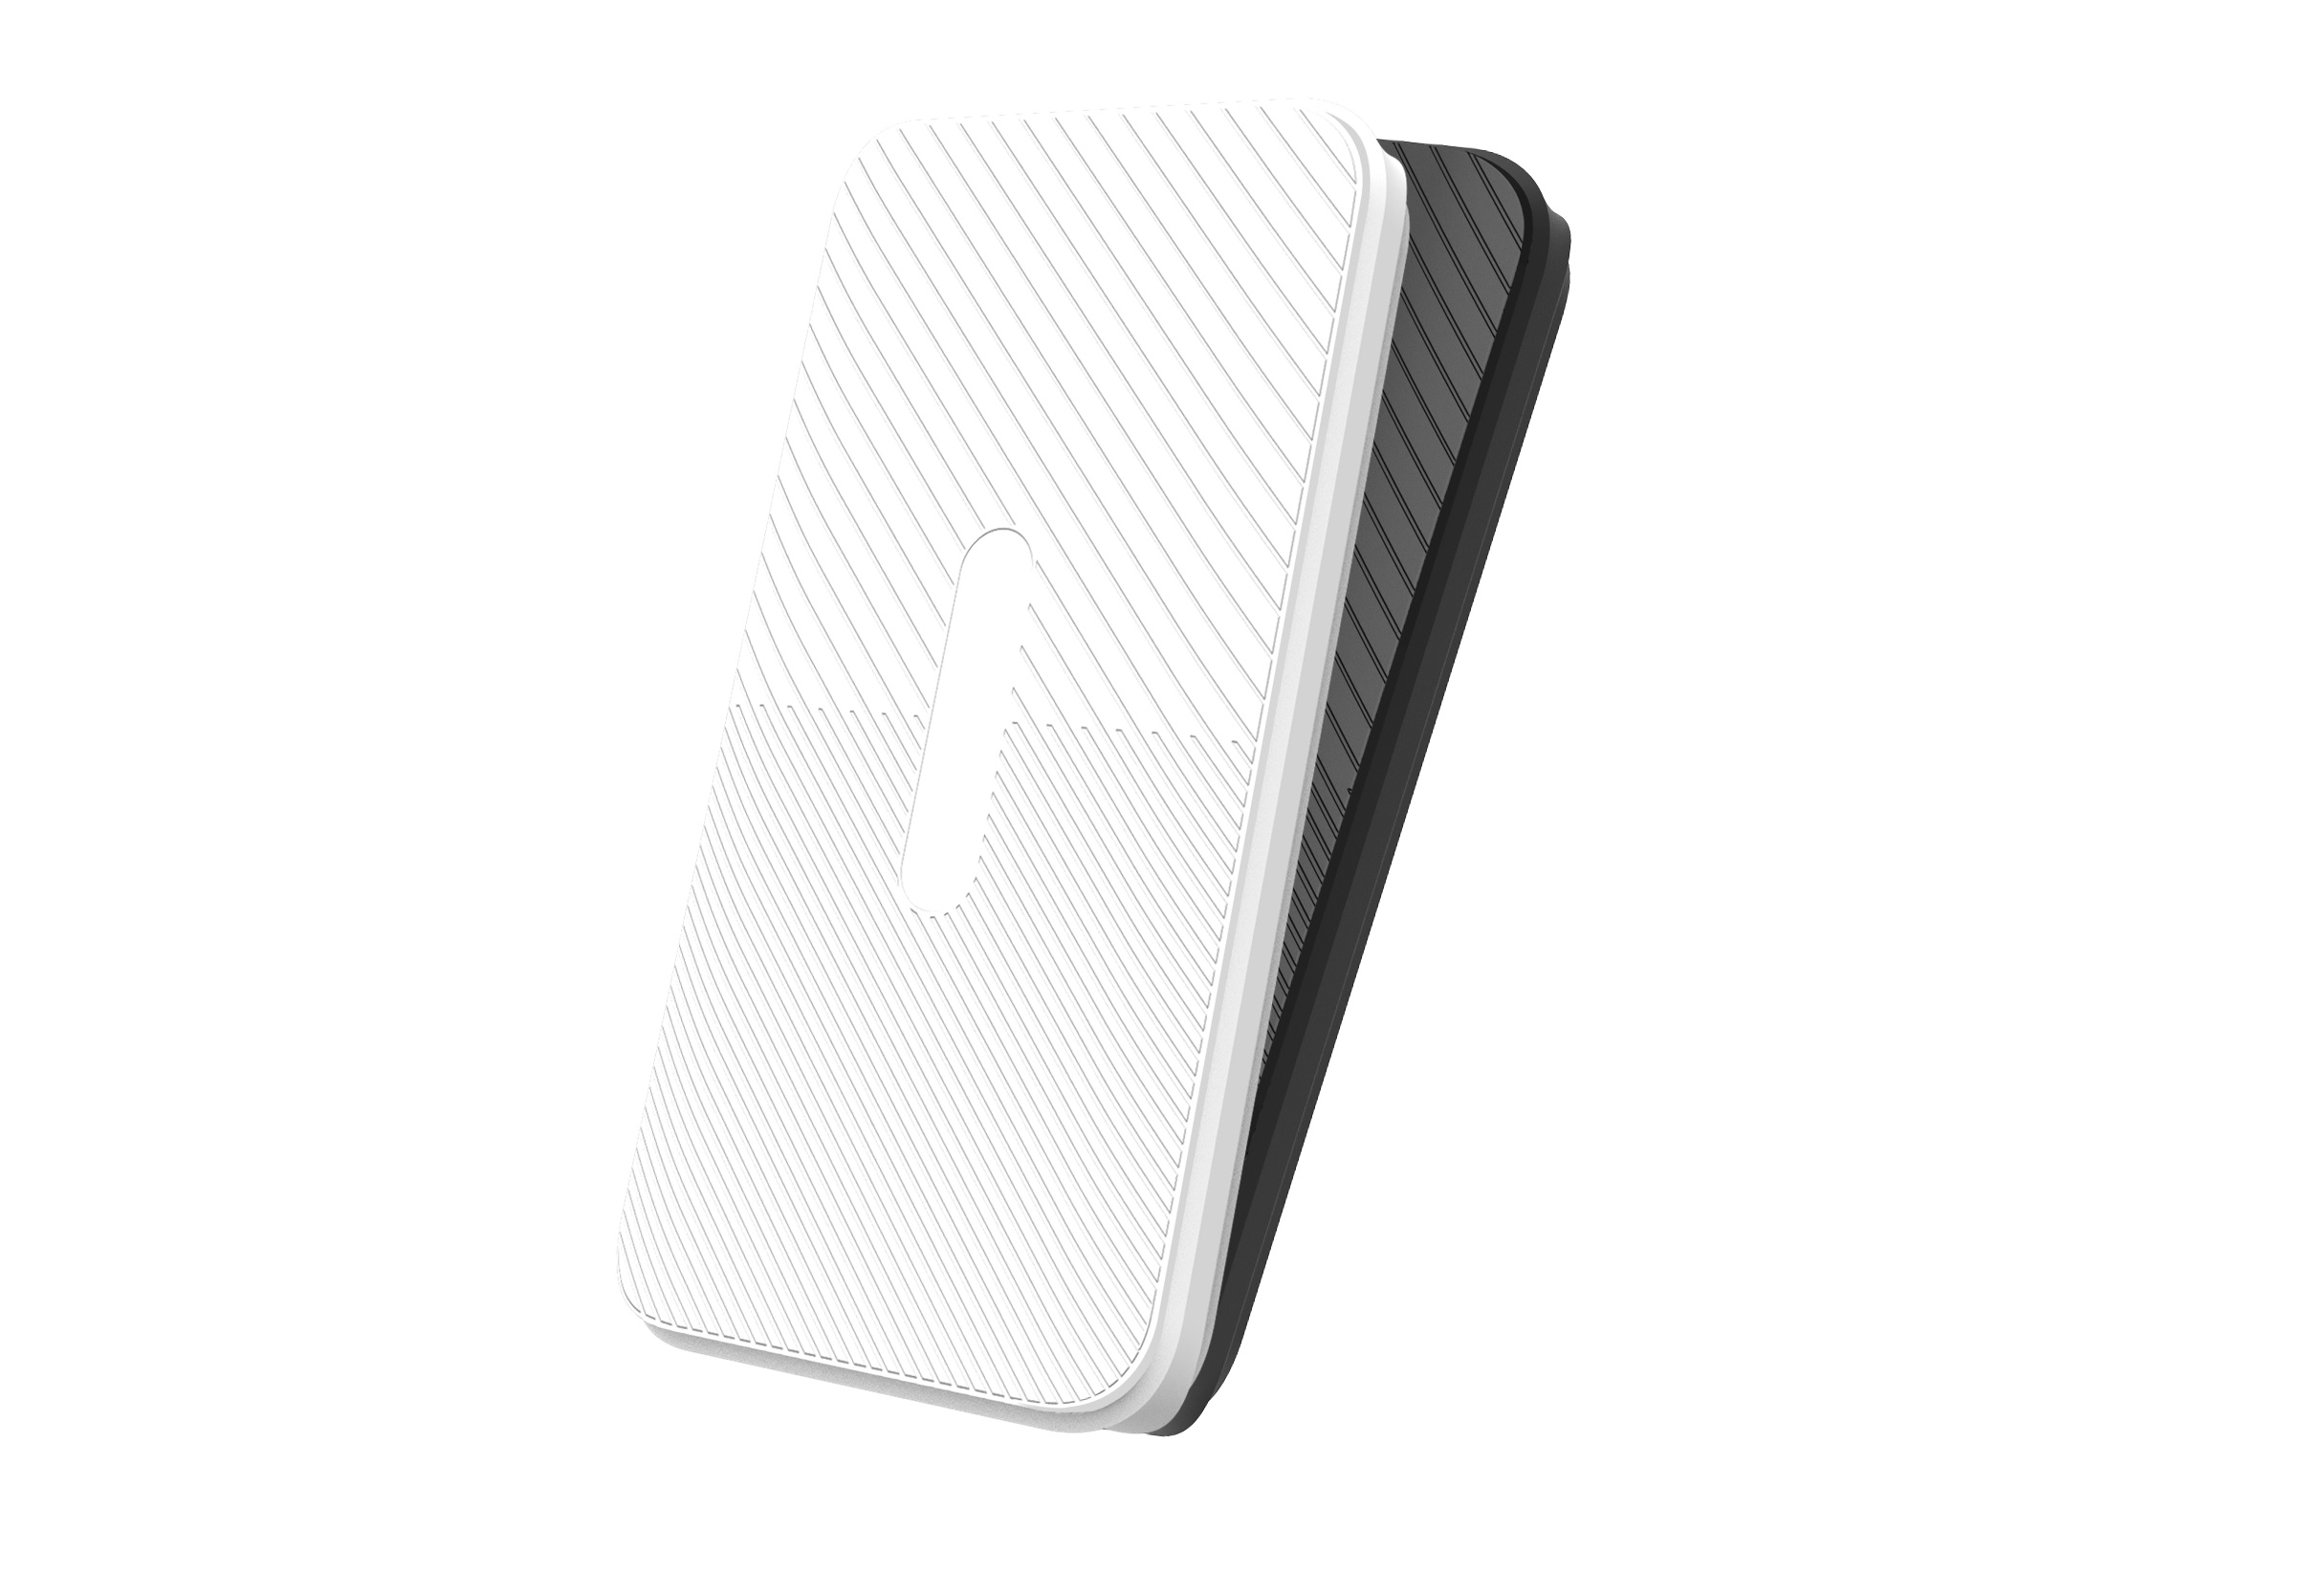 power bank with a capacity of 10000mAh